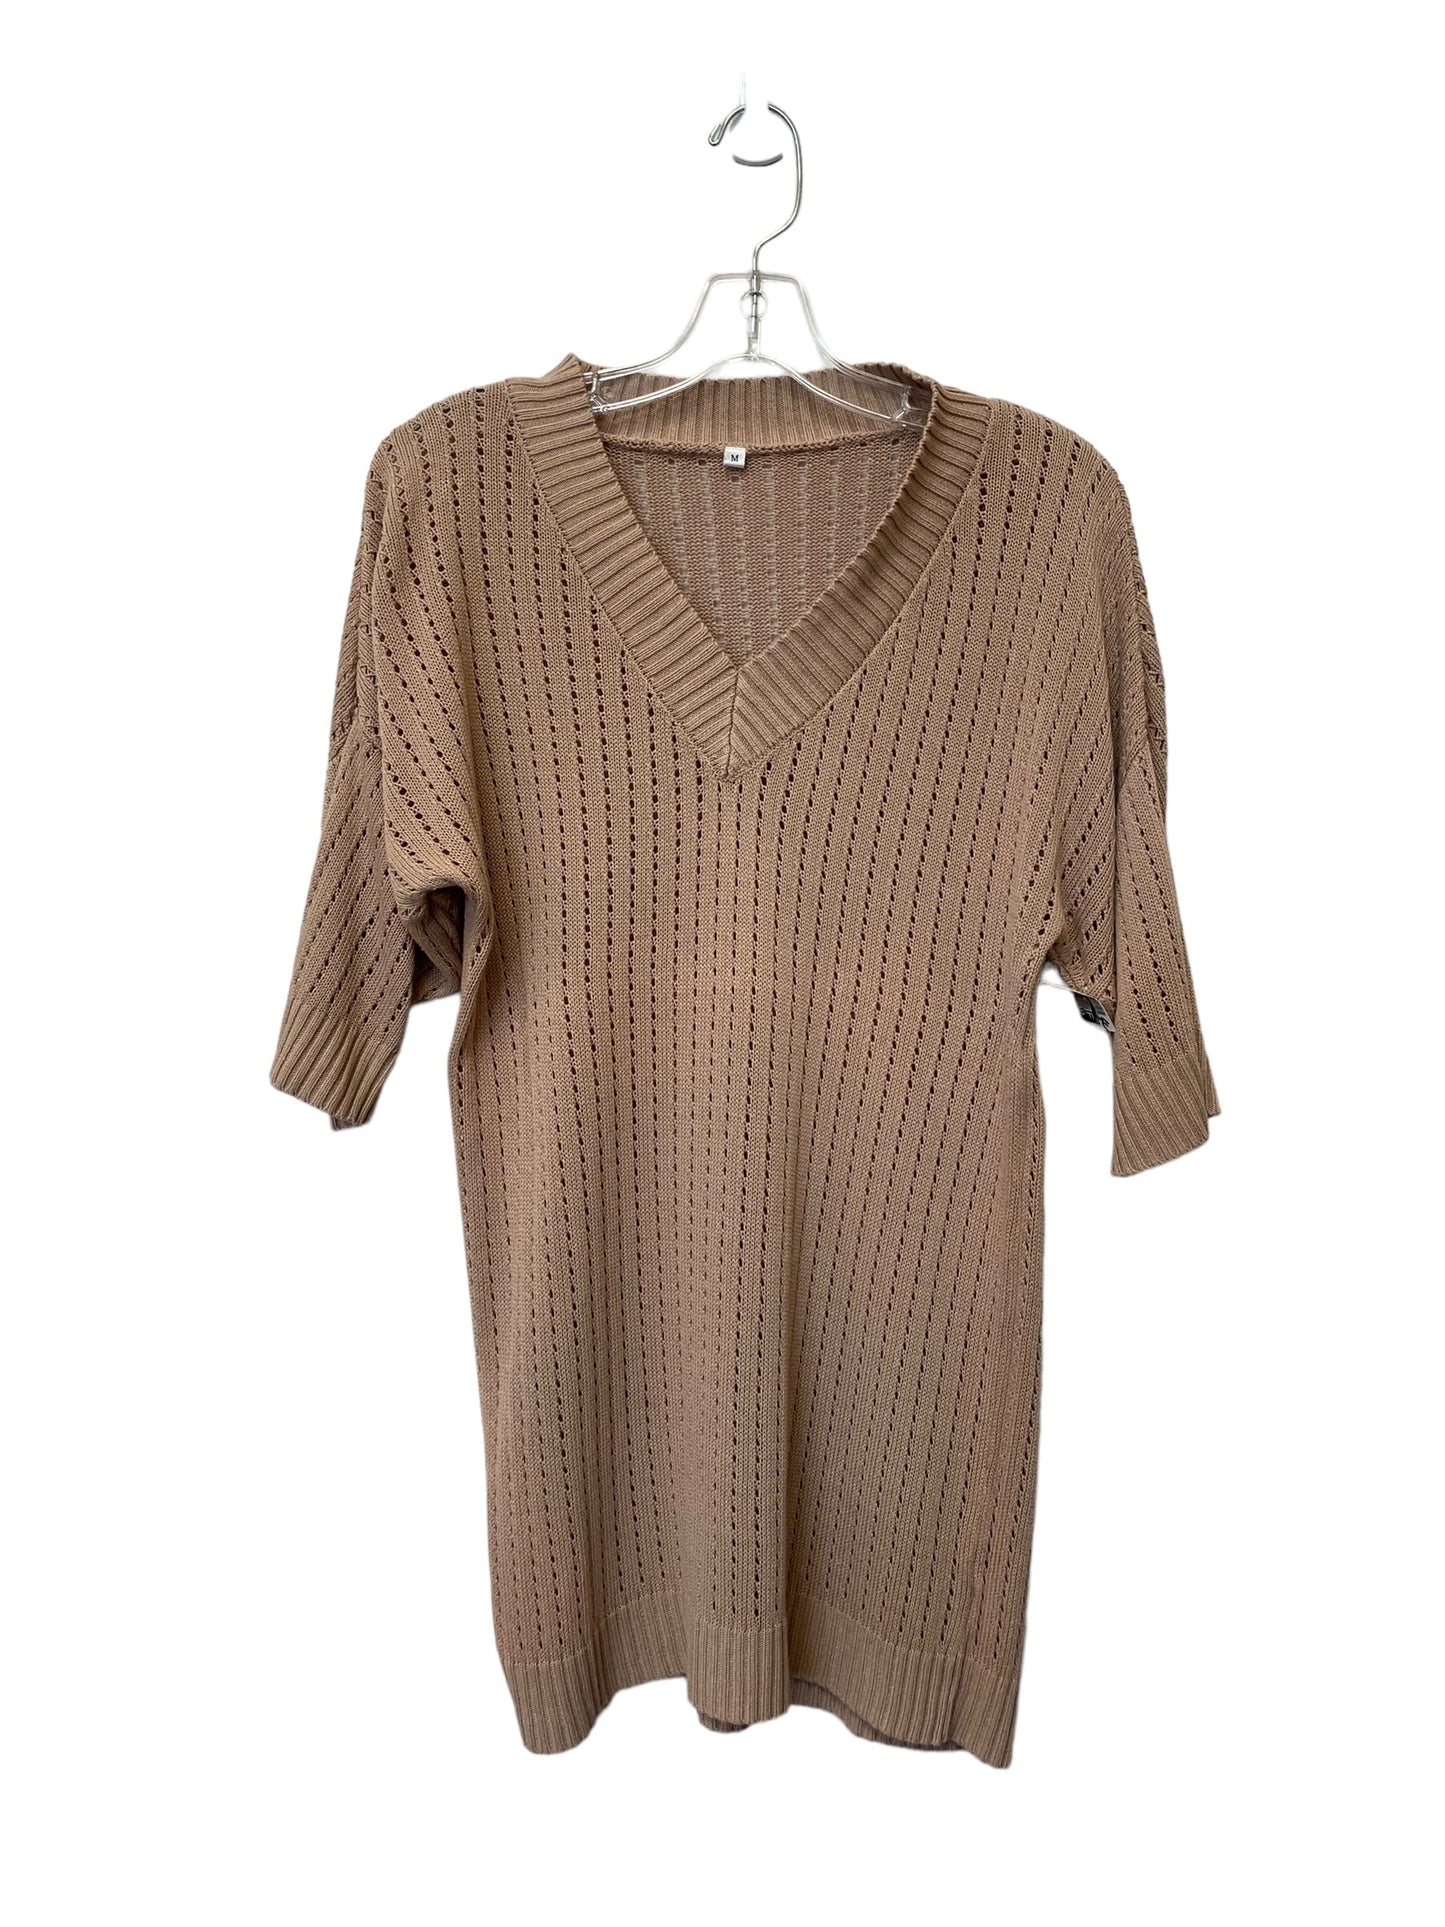 Tan Top Short Sleeve Clothes Mentor, Size M